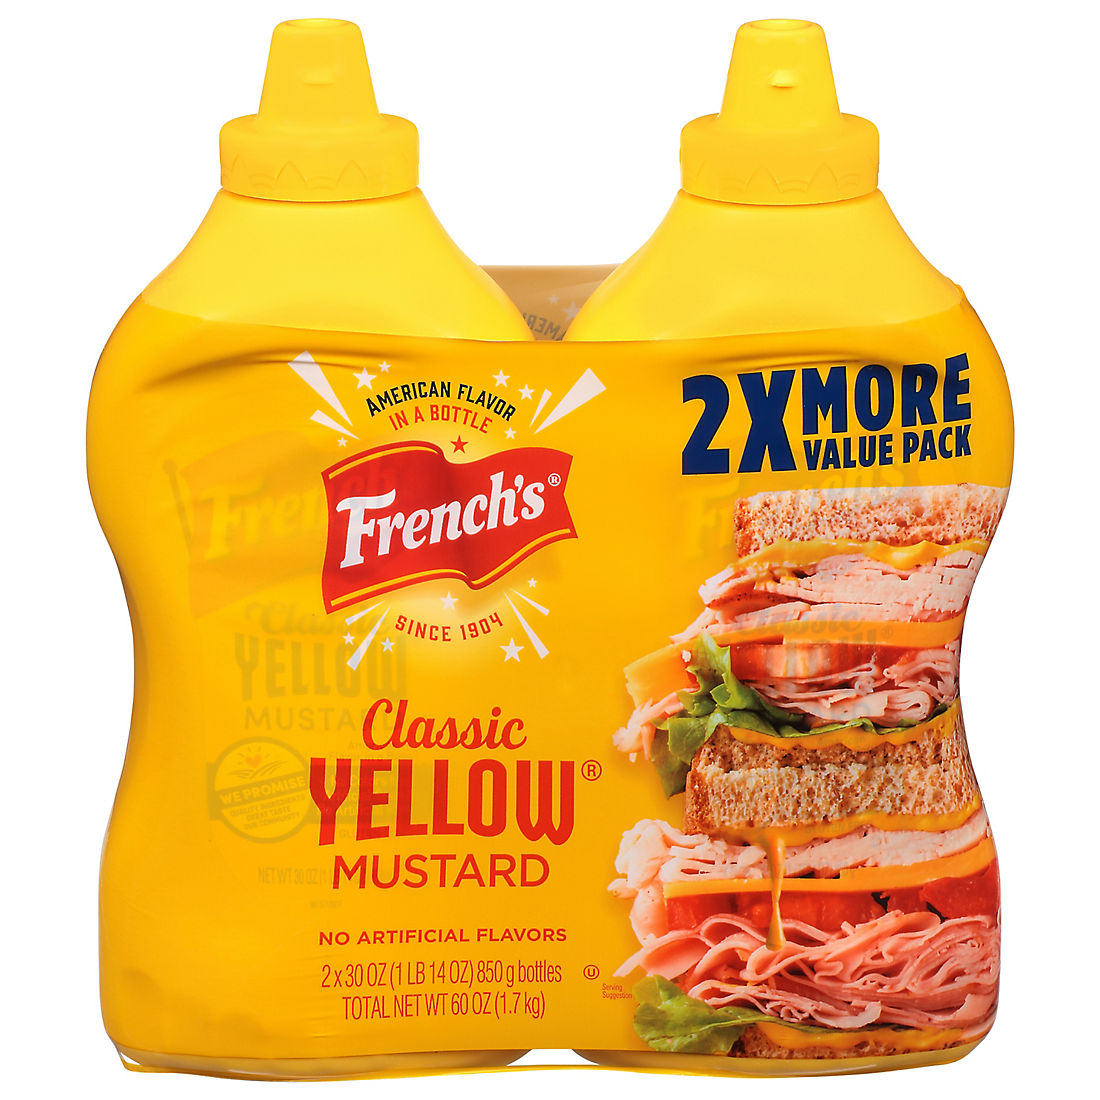 French's Frenchs, Yellow Classic Mustard, 14 oz 買い保障できる